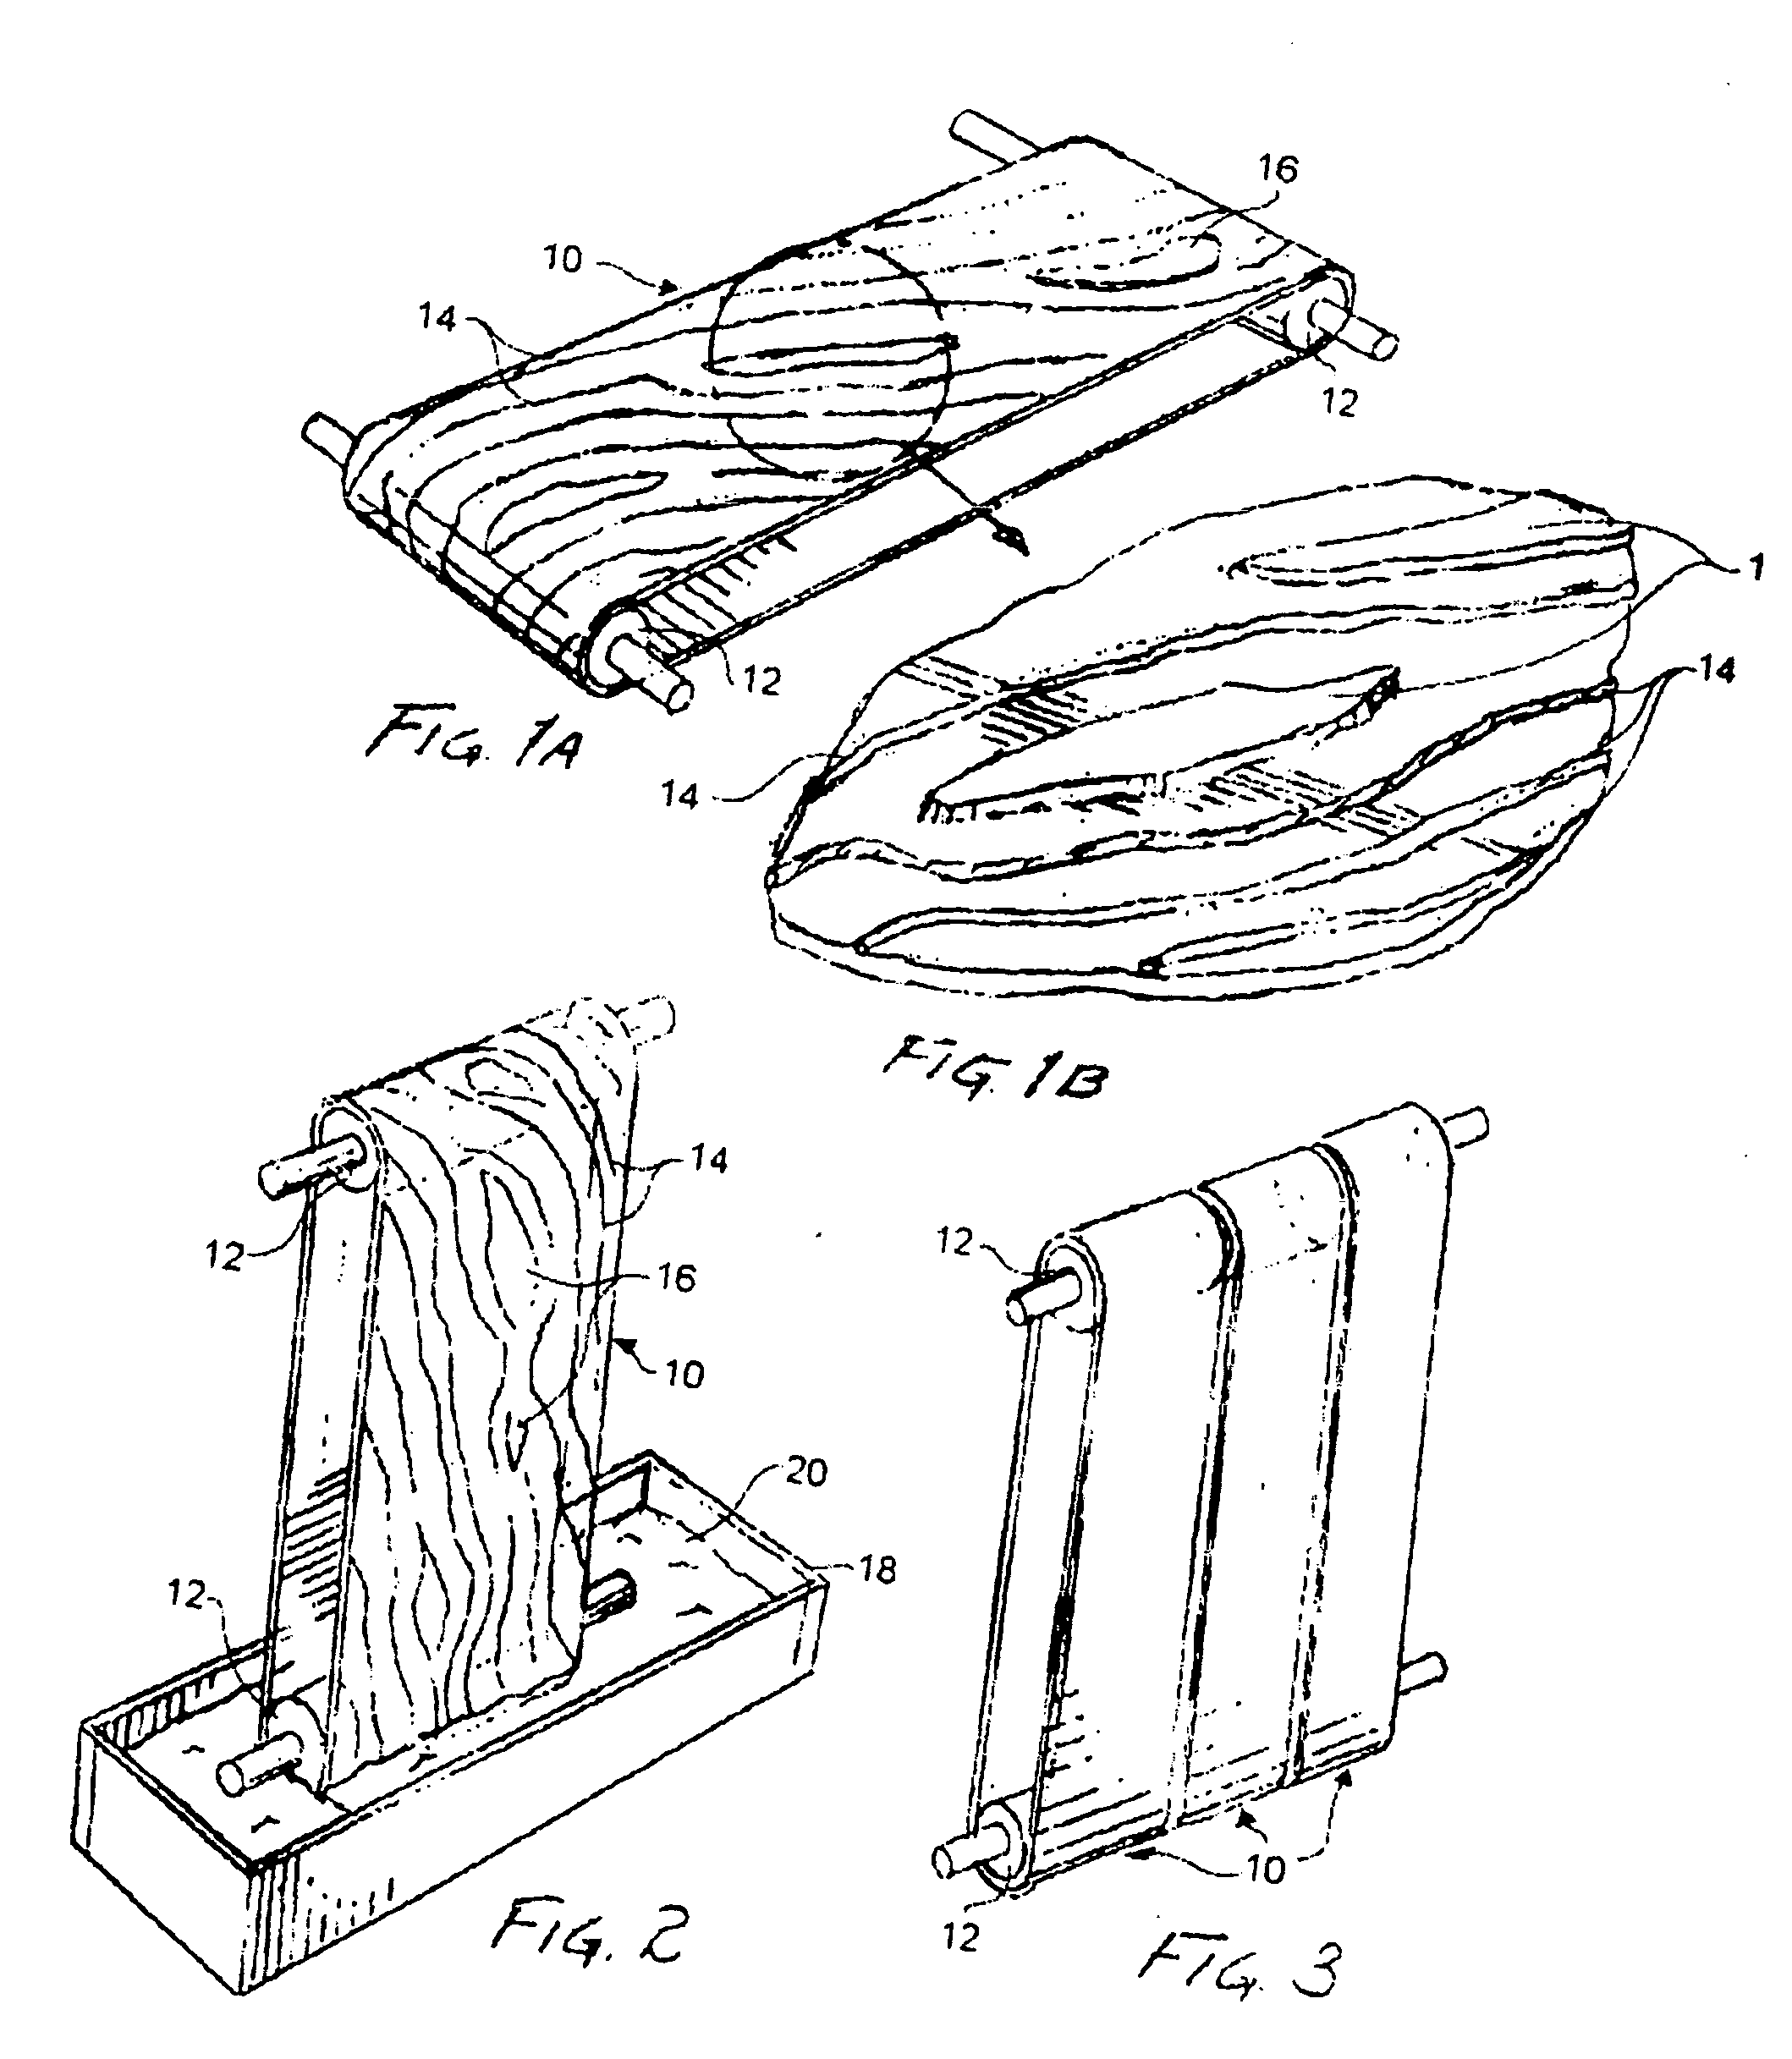 Decorative powder coated articles and methods thereof